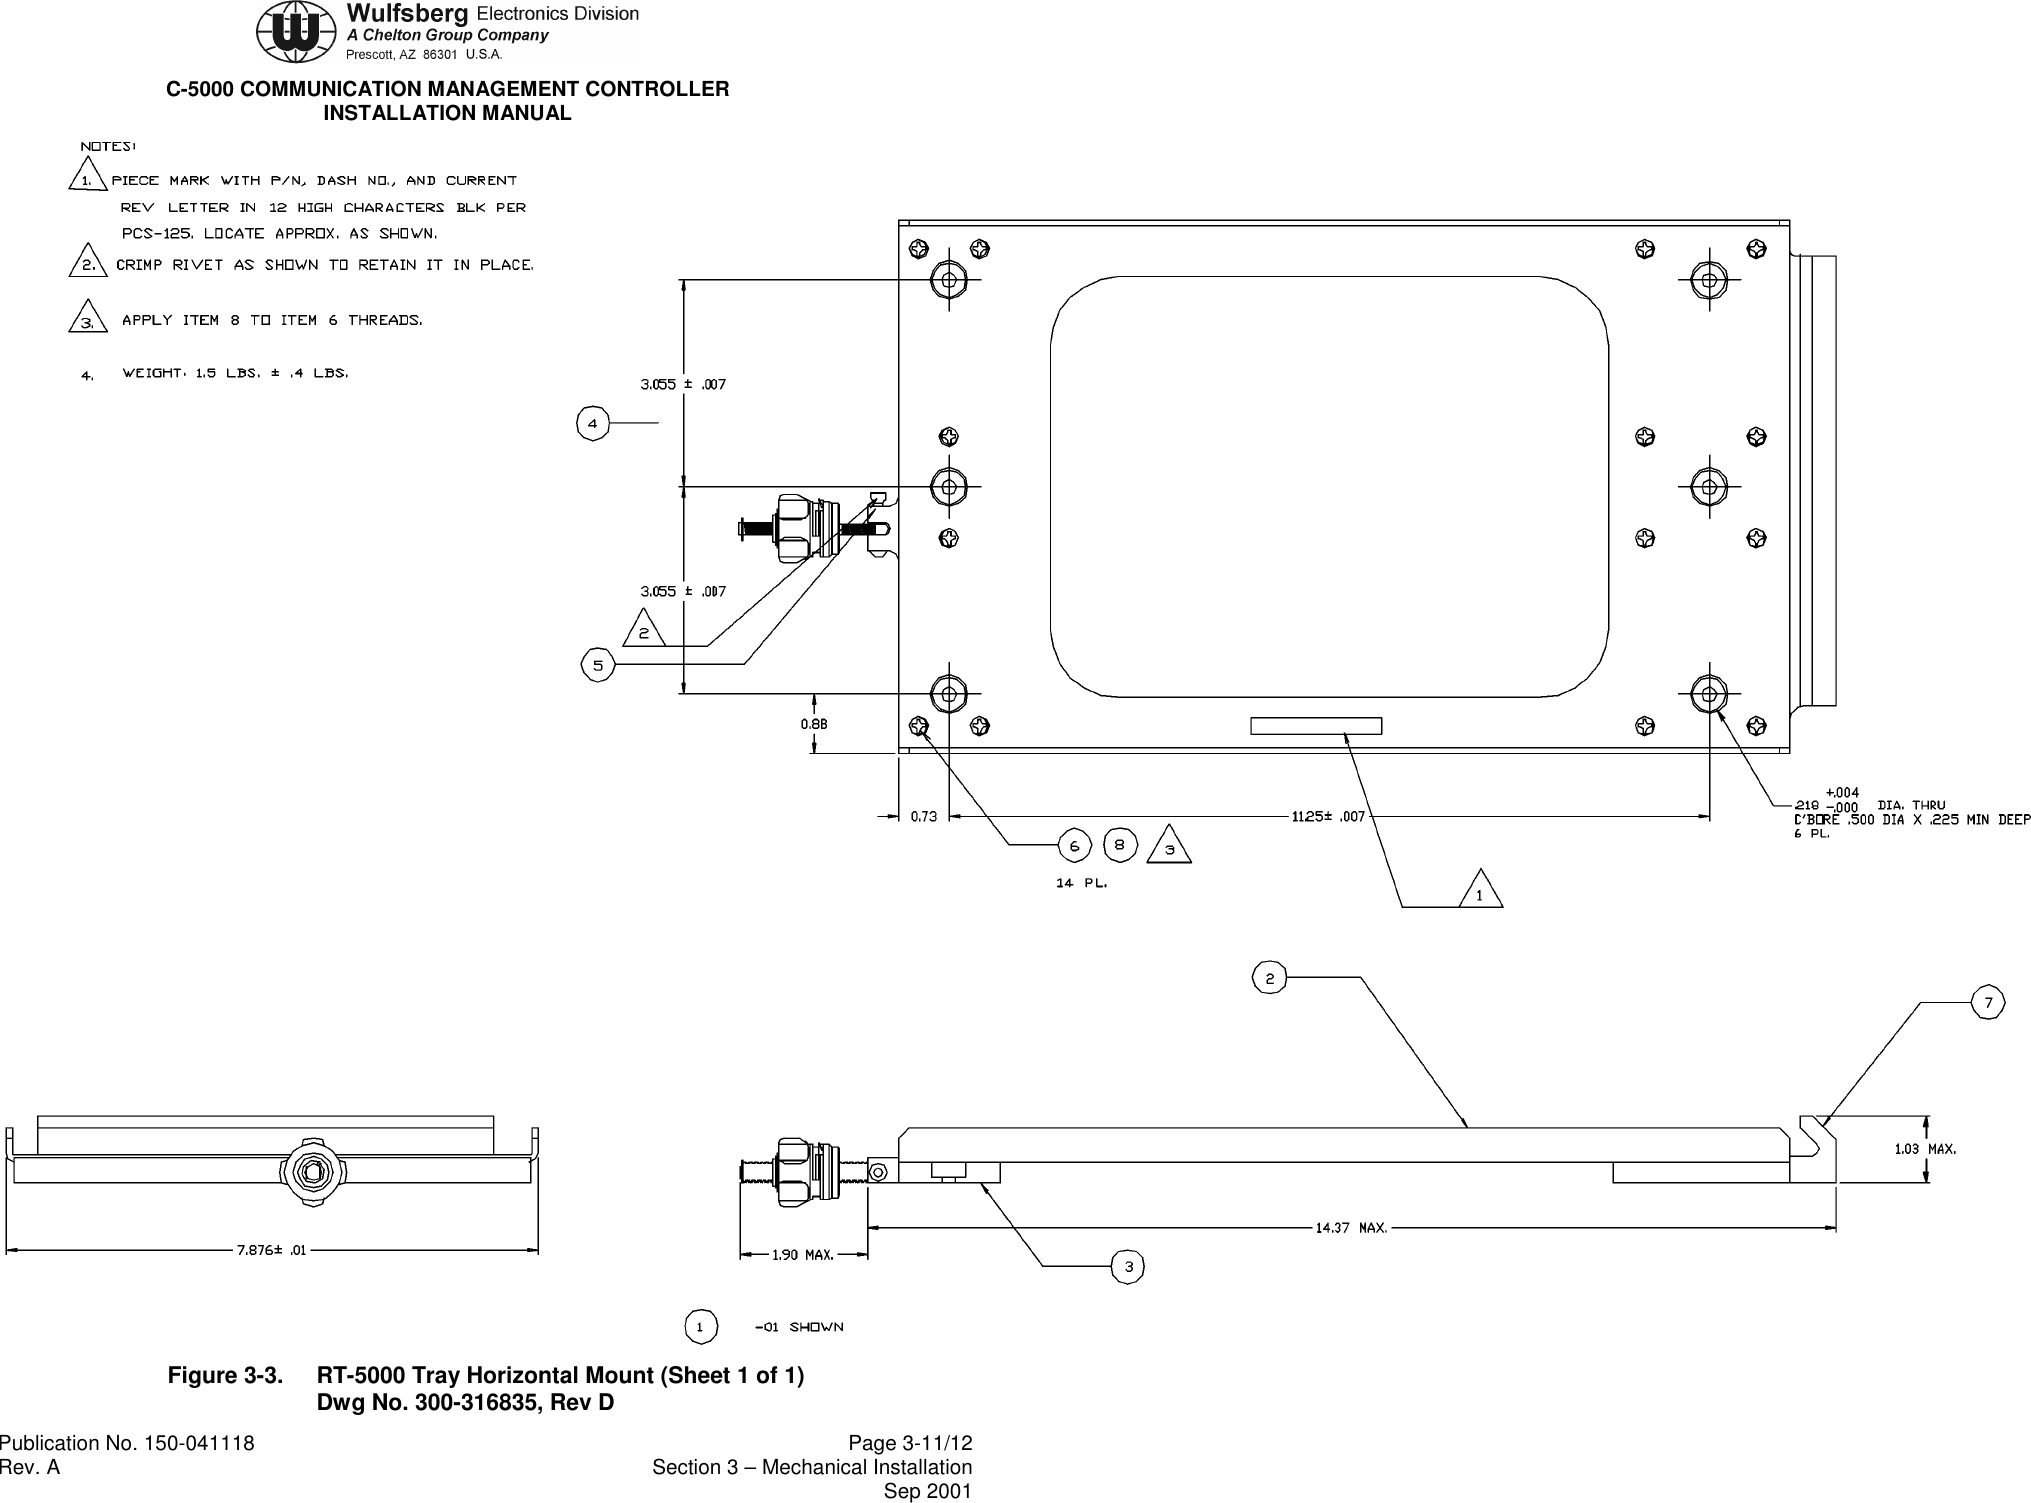 C-5000 COMMUNICATION MANAGEMENT CONTROLLERINSTALLATION MANUALPublication No. 150-041118 Page 3-11/12Rev. A Section 3 – Mechanical InstallationSep 2001Figure 3-3. RT-5000 Tray Horizontal Mount (Sheet 1 of 1)Dwg No. 300-316835, Rev D